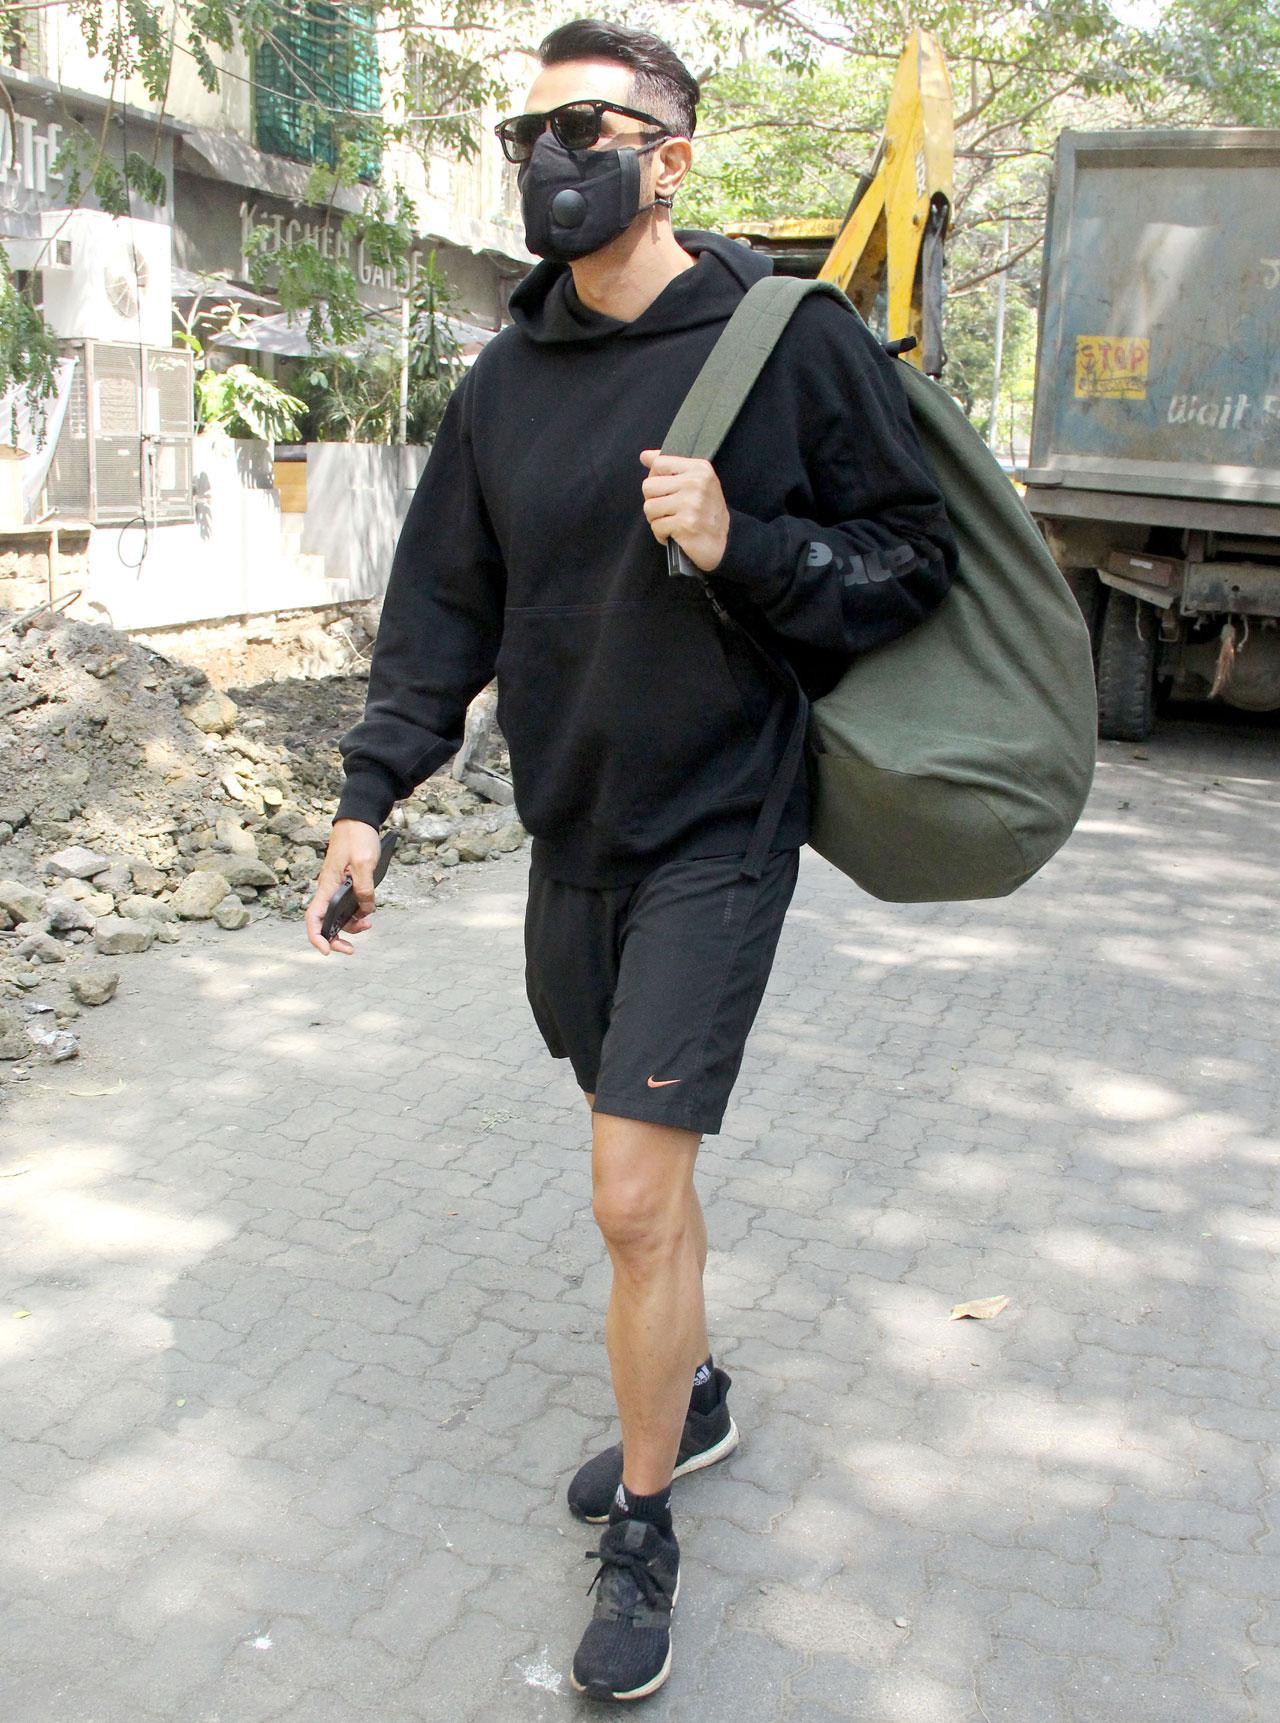 Arjun Rampal was also clicked in Bandra. The actor, who was last seen in ZEE5's Nail Polish, was dressed in an all-black casual attire.